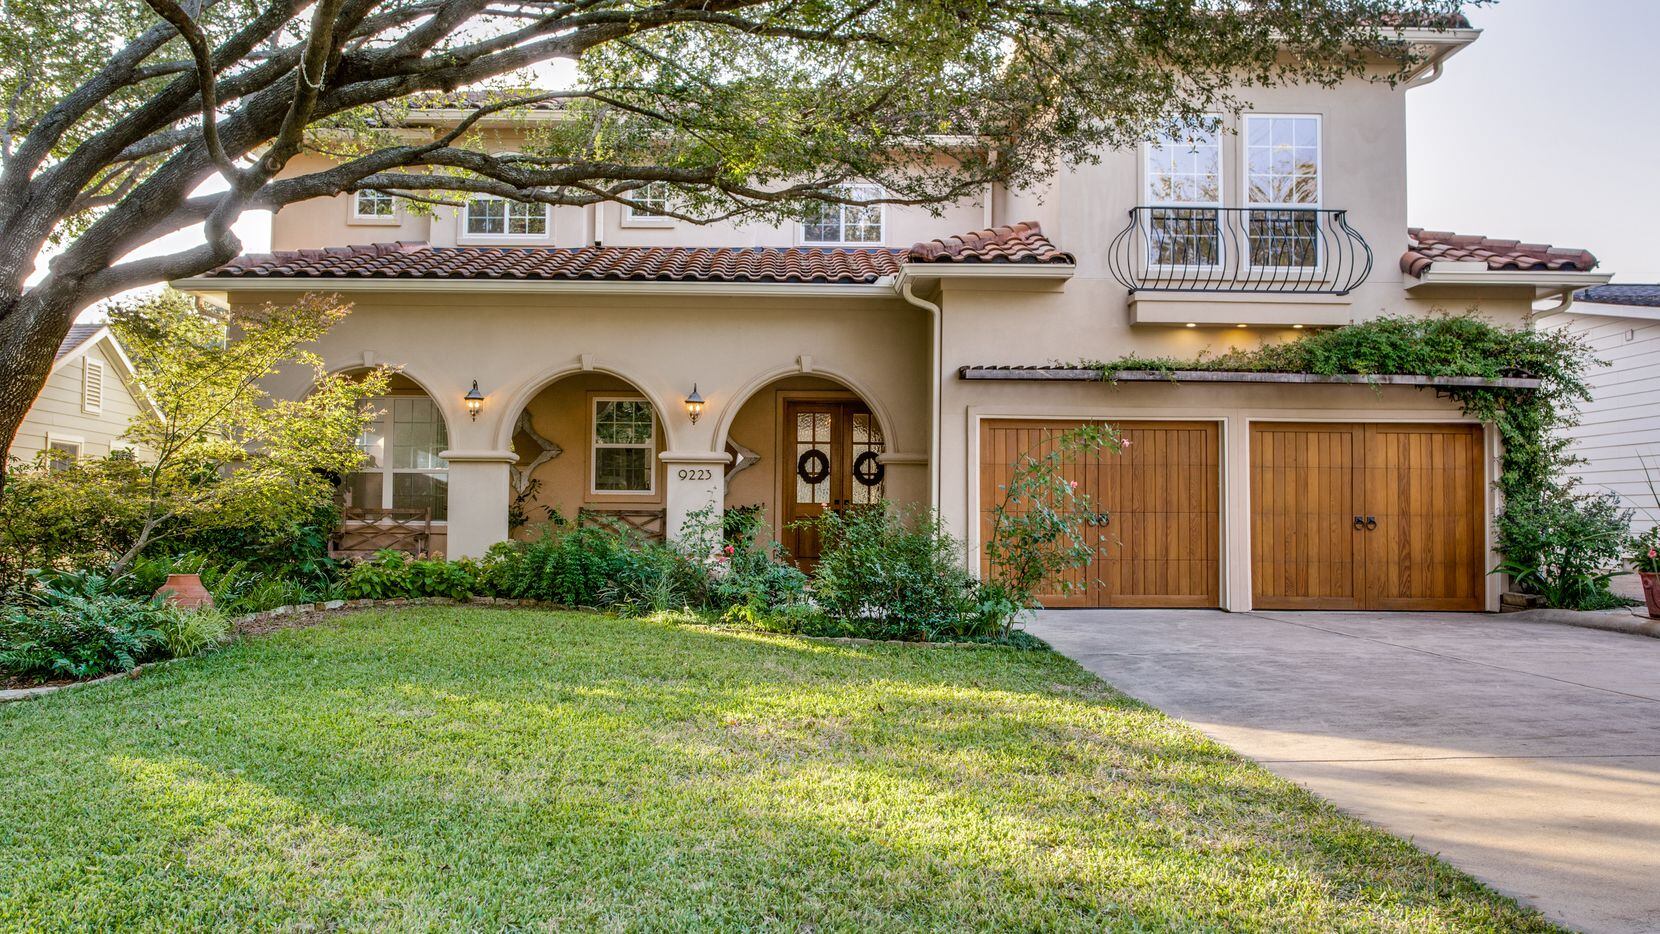 Take a look at the home at 9223 Biscayne Blvd. in Dallas.